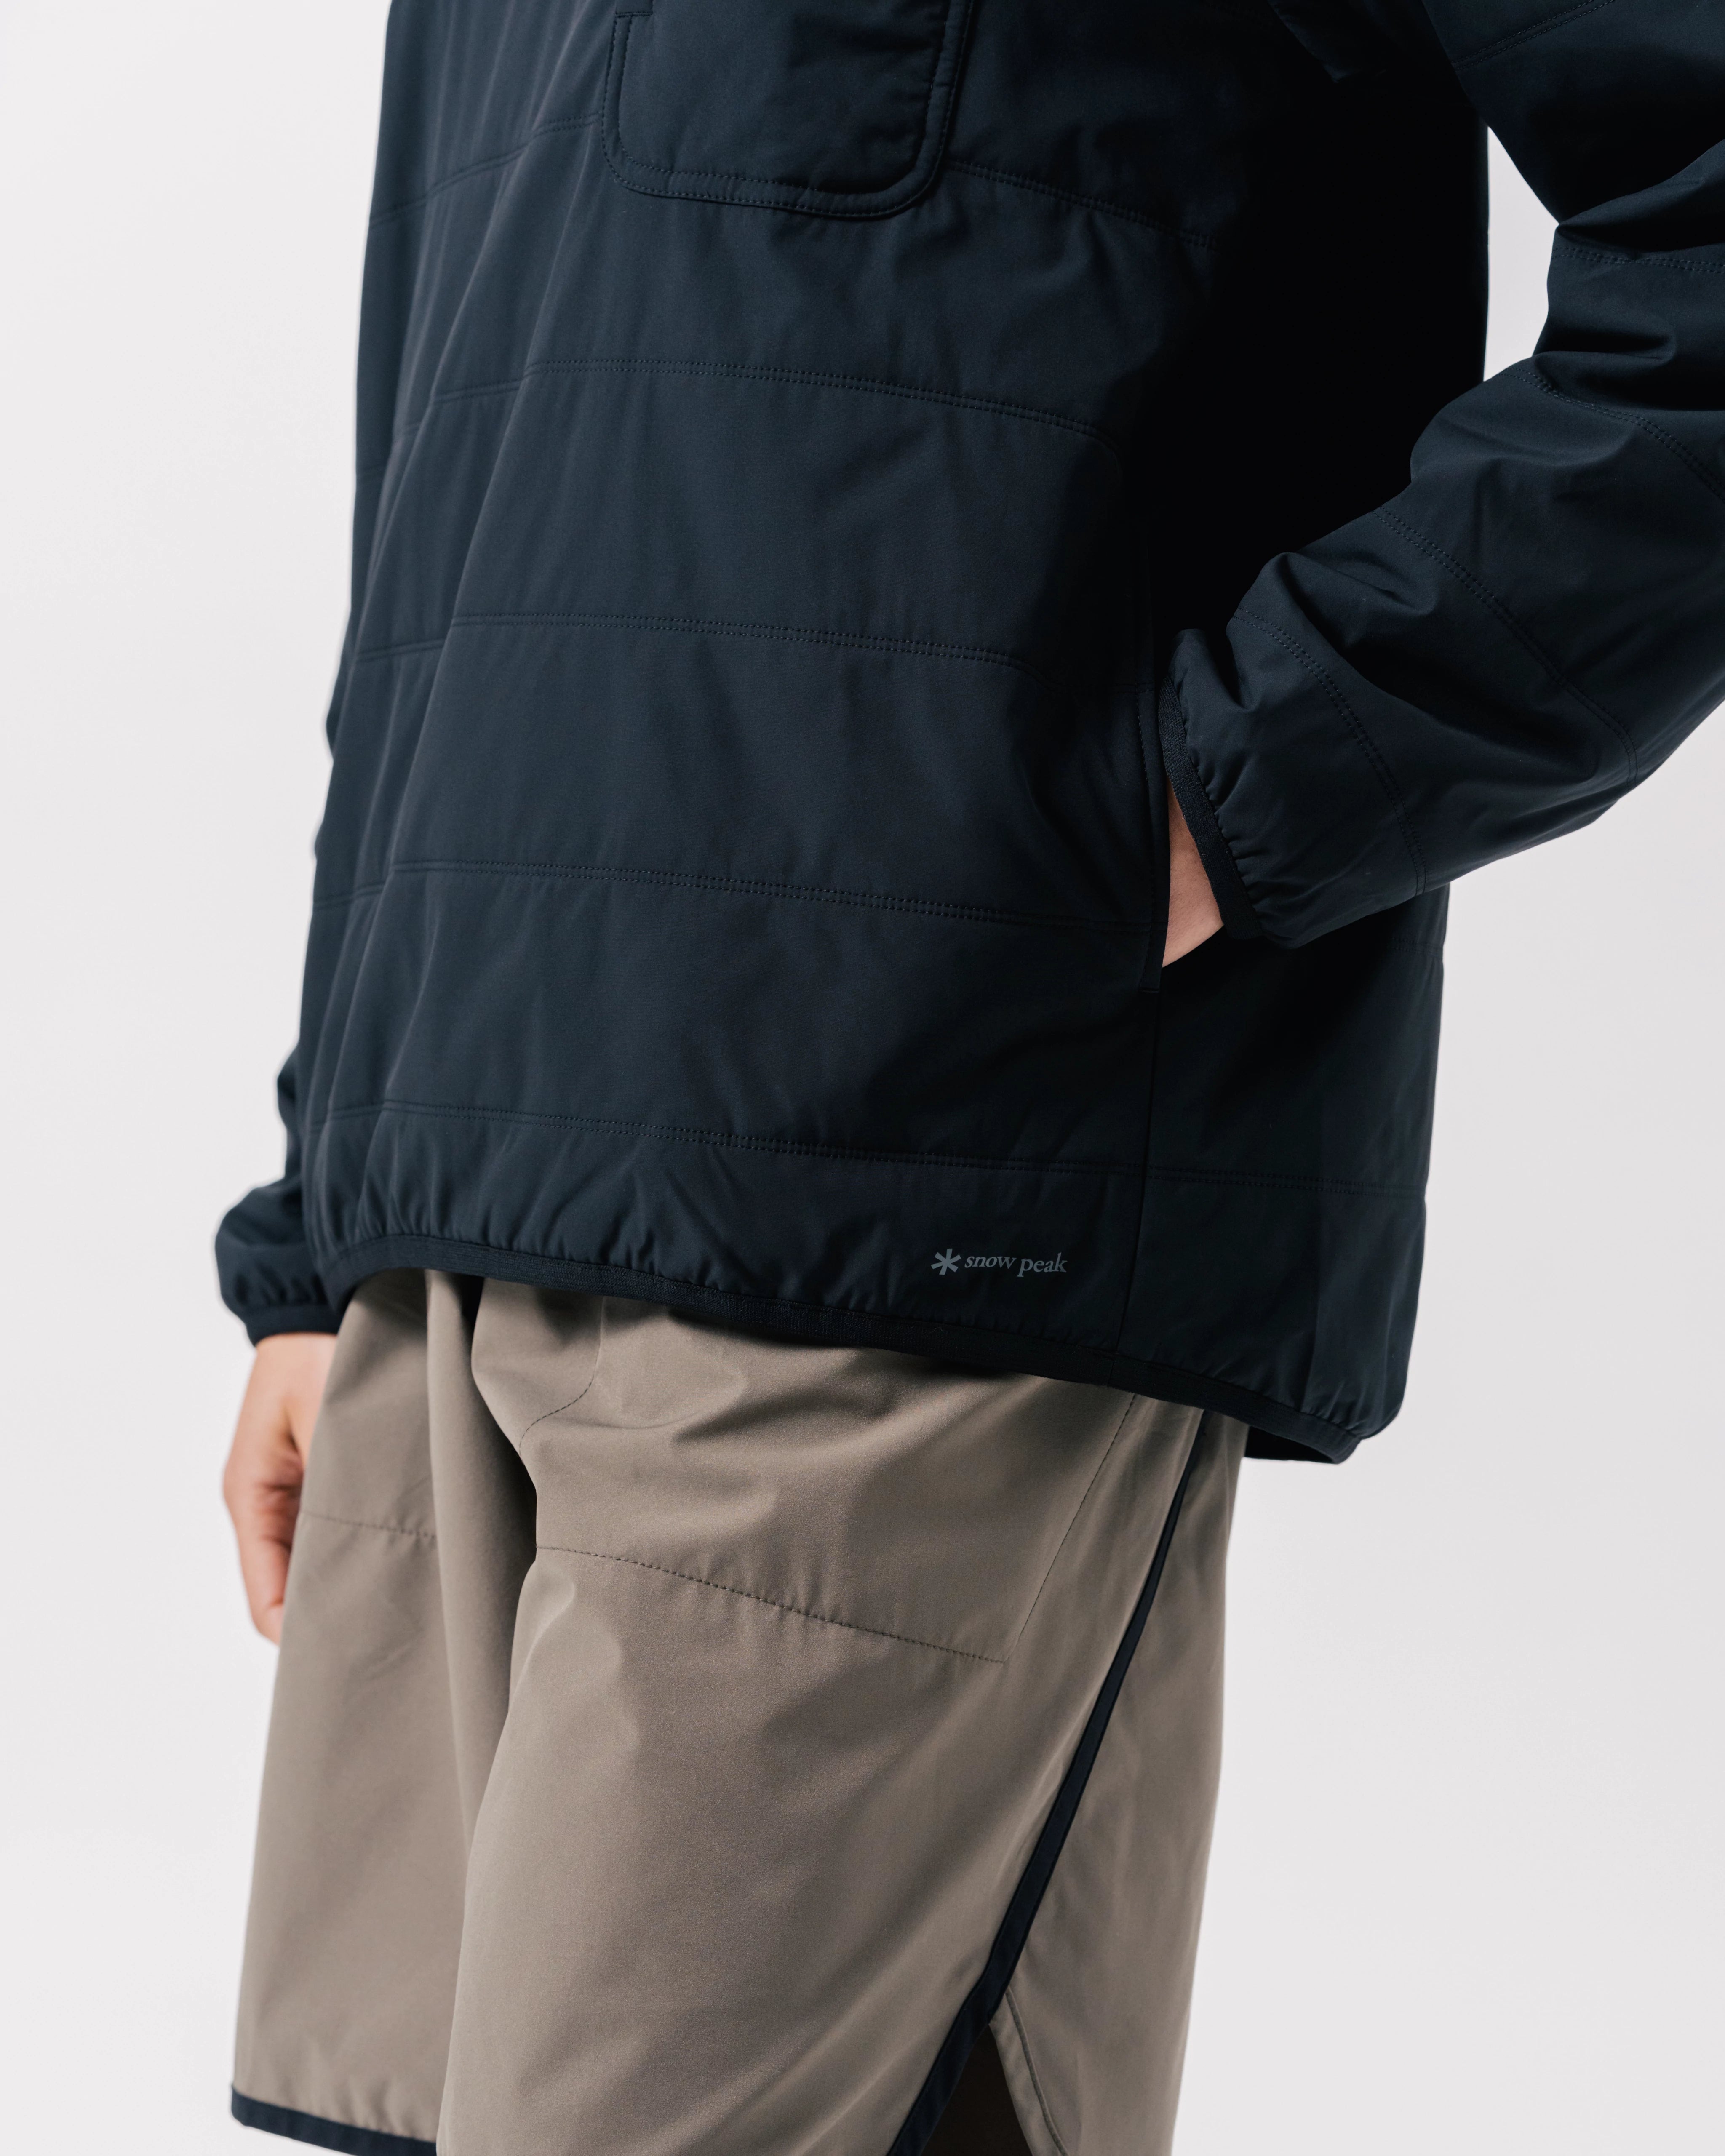 FLEXIBLE INSULATED PULLOVER - BLACK